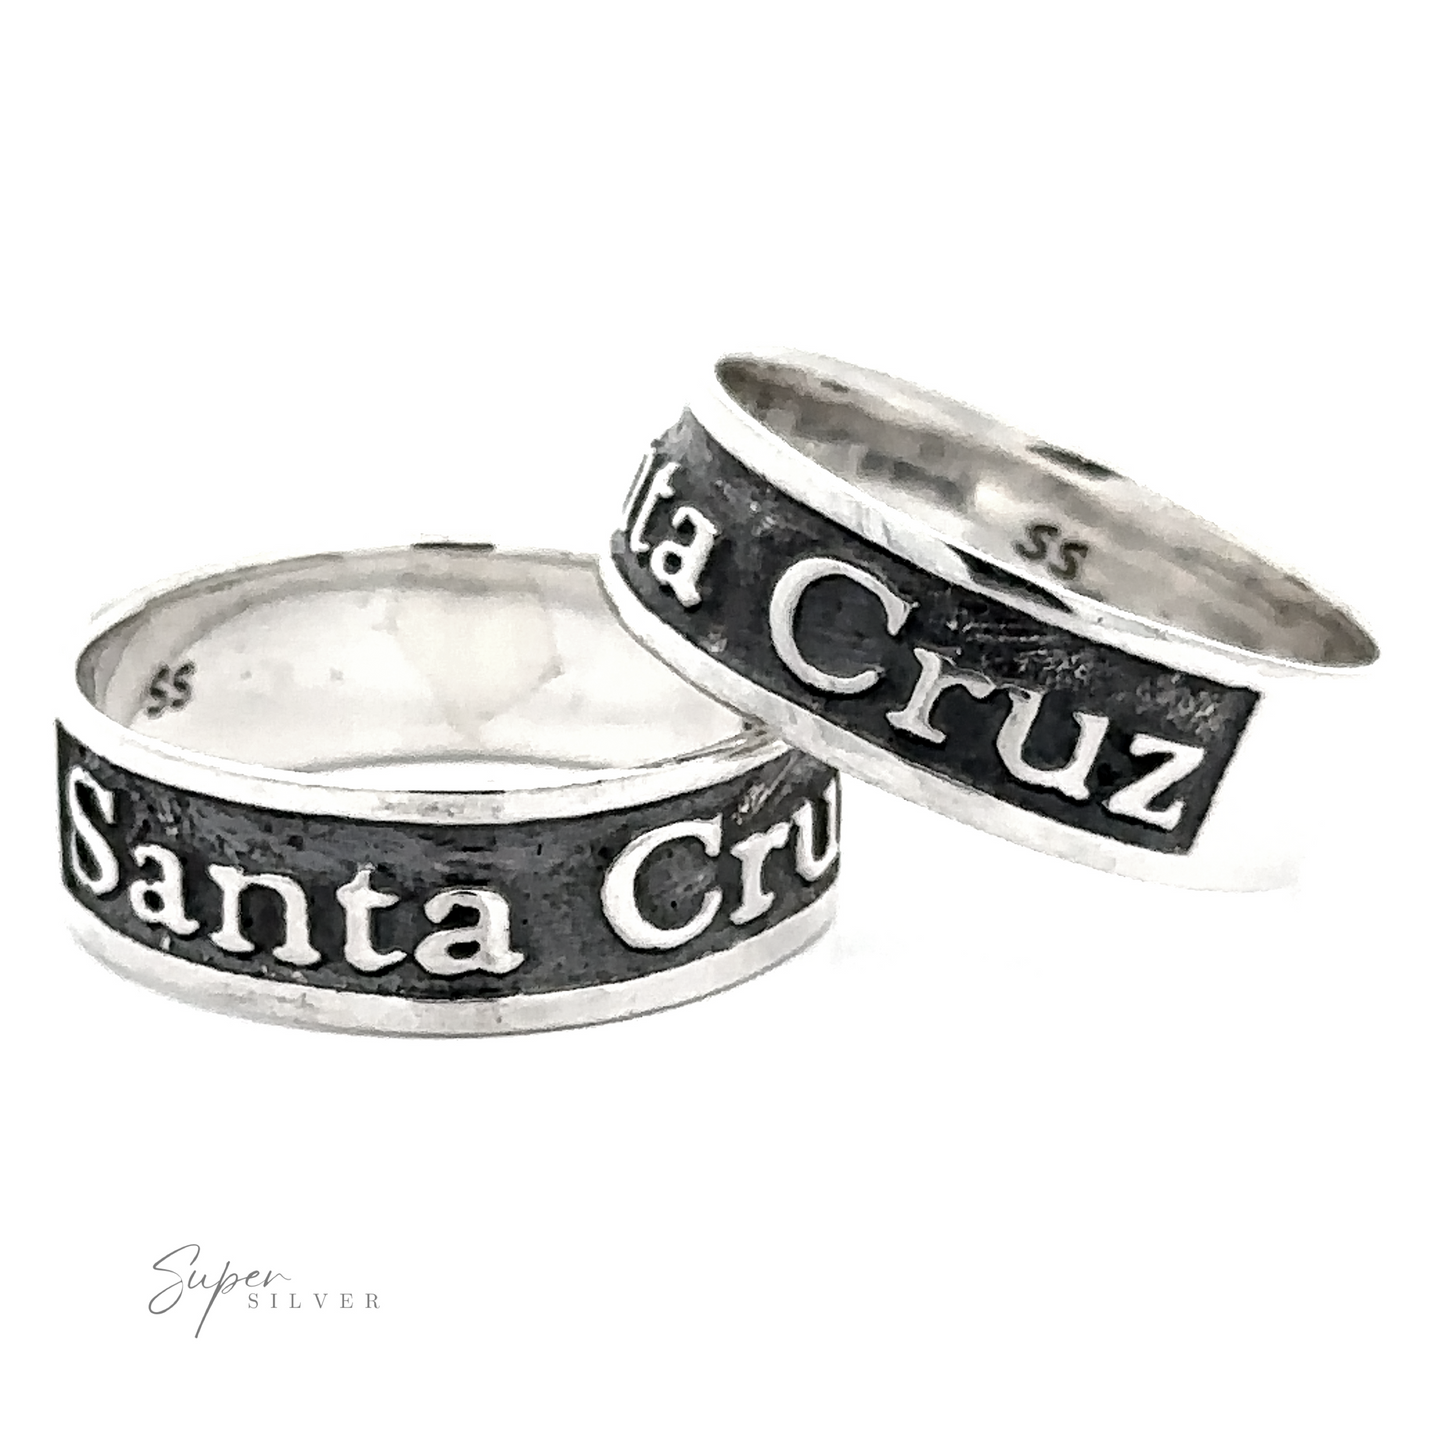 Two Sterling Silver Santa Cruz rings displayed against a white background.